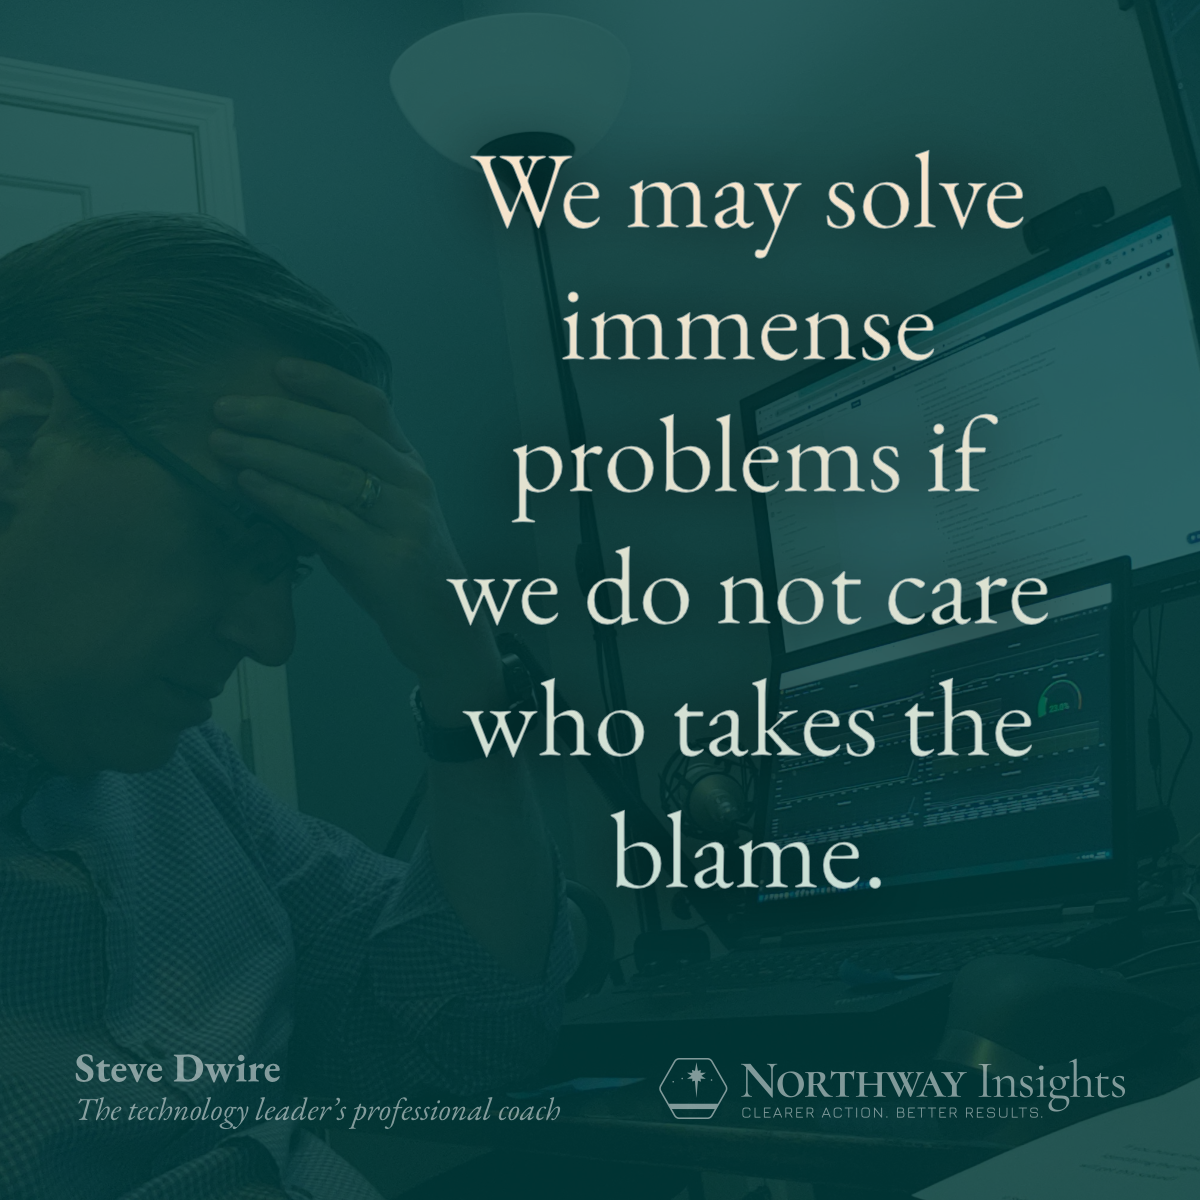 We may solve immense problems if we do not care who takes the blame